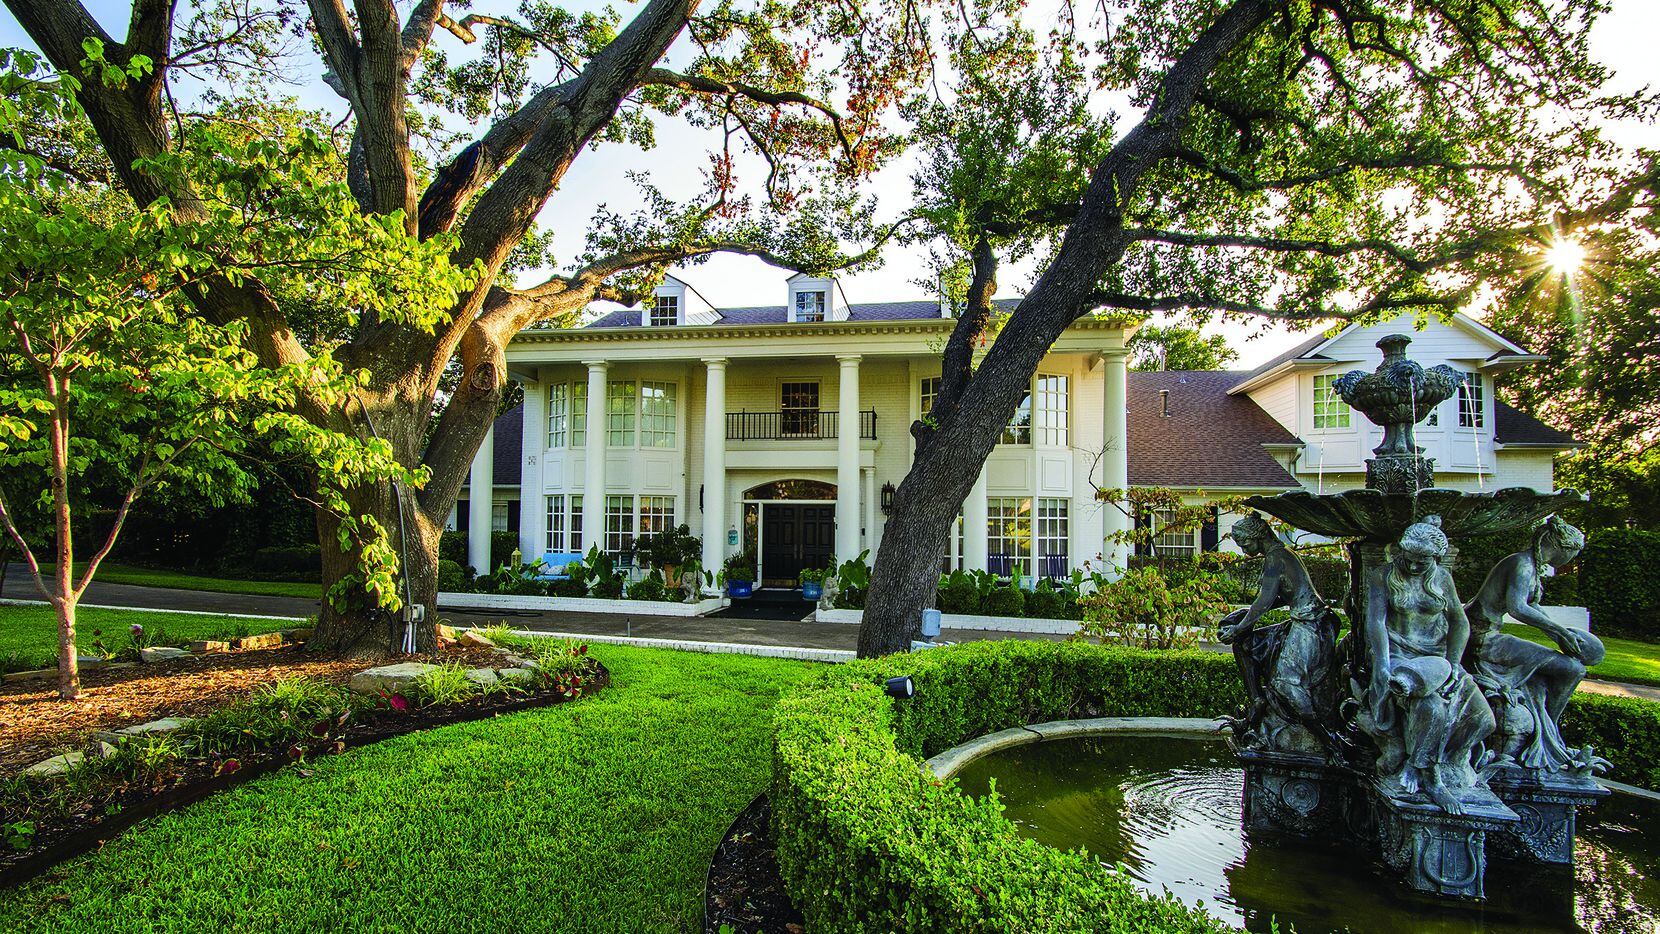 The Greek Revival home at 6706 Gateridge Drive in Northwood Hills is offered for $1,450,000 by The Shamsa Group.